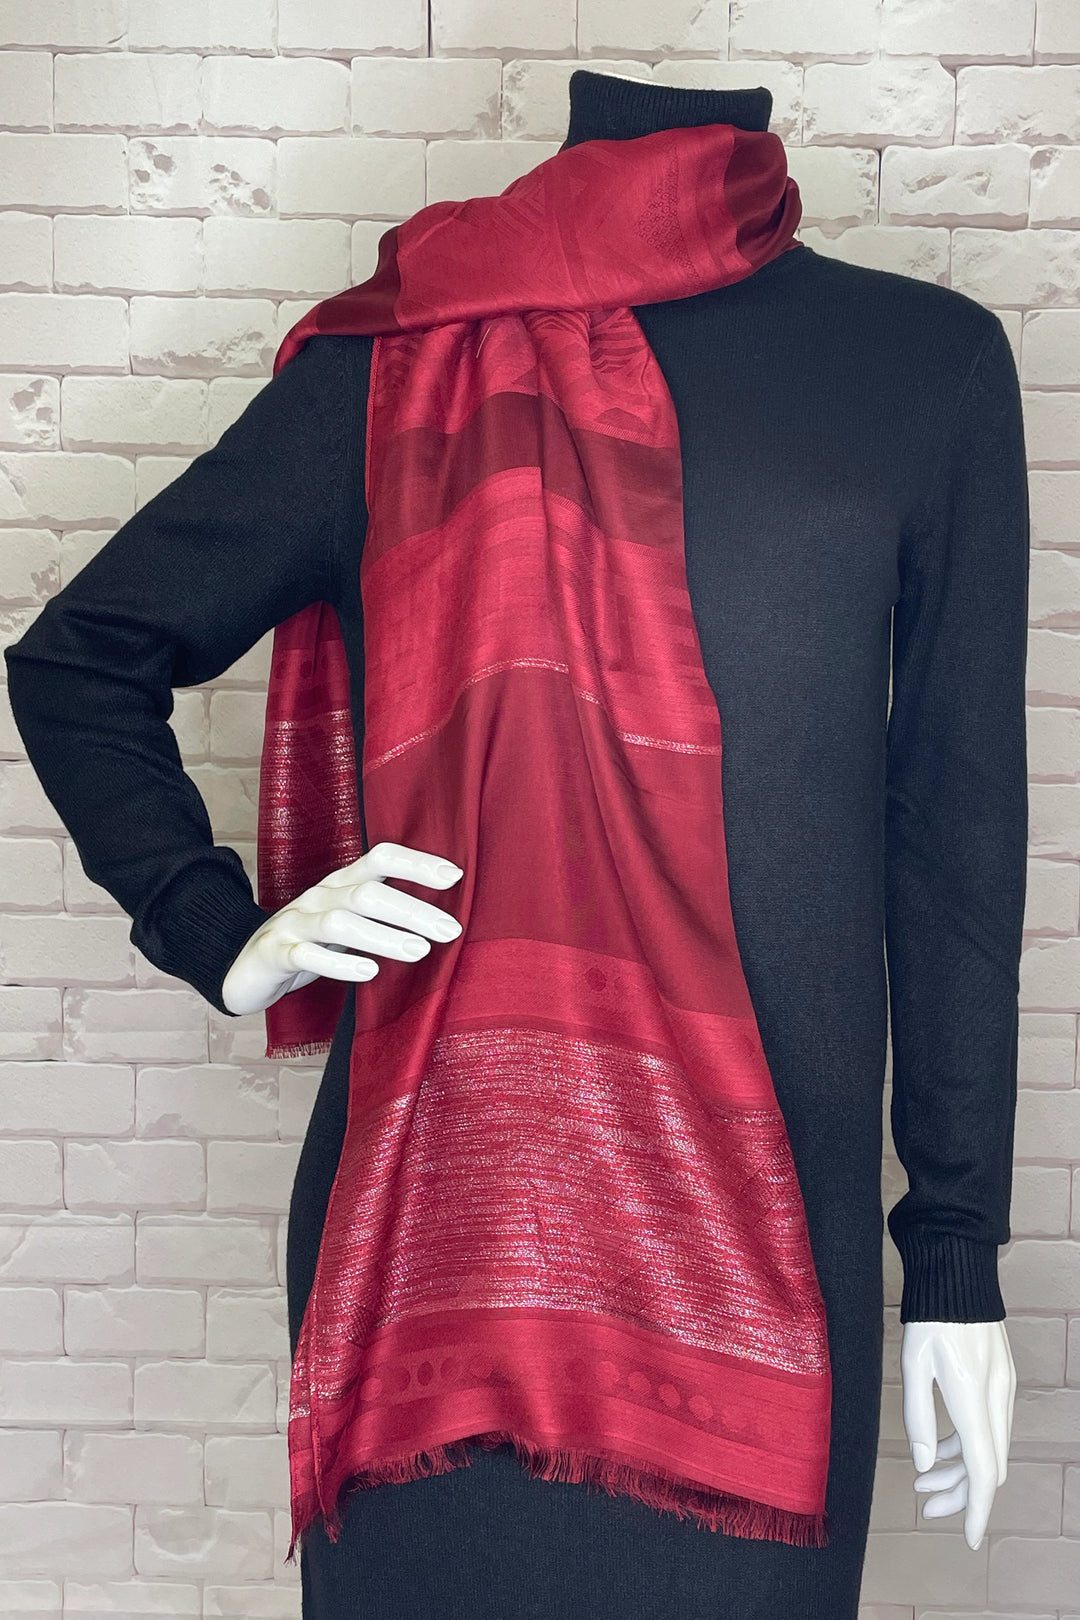 Boasting a stunning silver thread pattern design and light fringe detail, this ultra lightweight scarf will bring a touch of elegance and sophistication to any outfit.